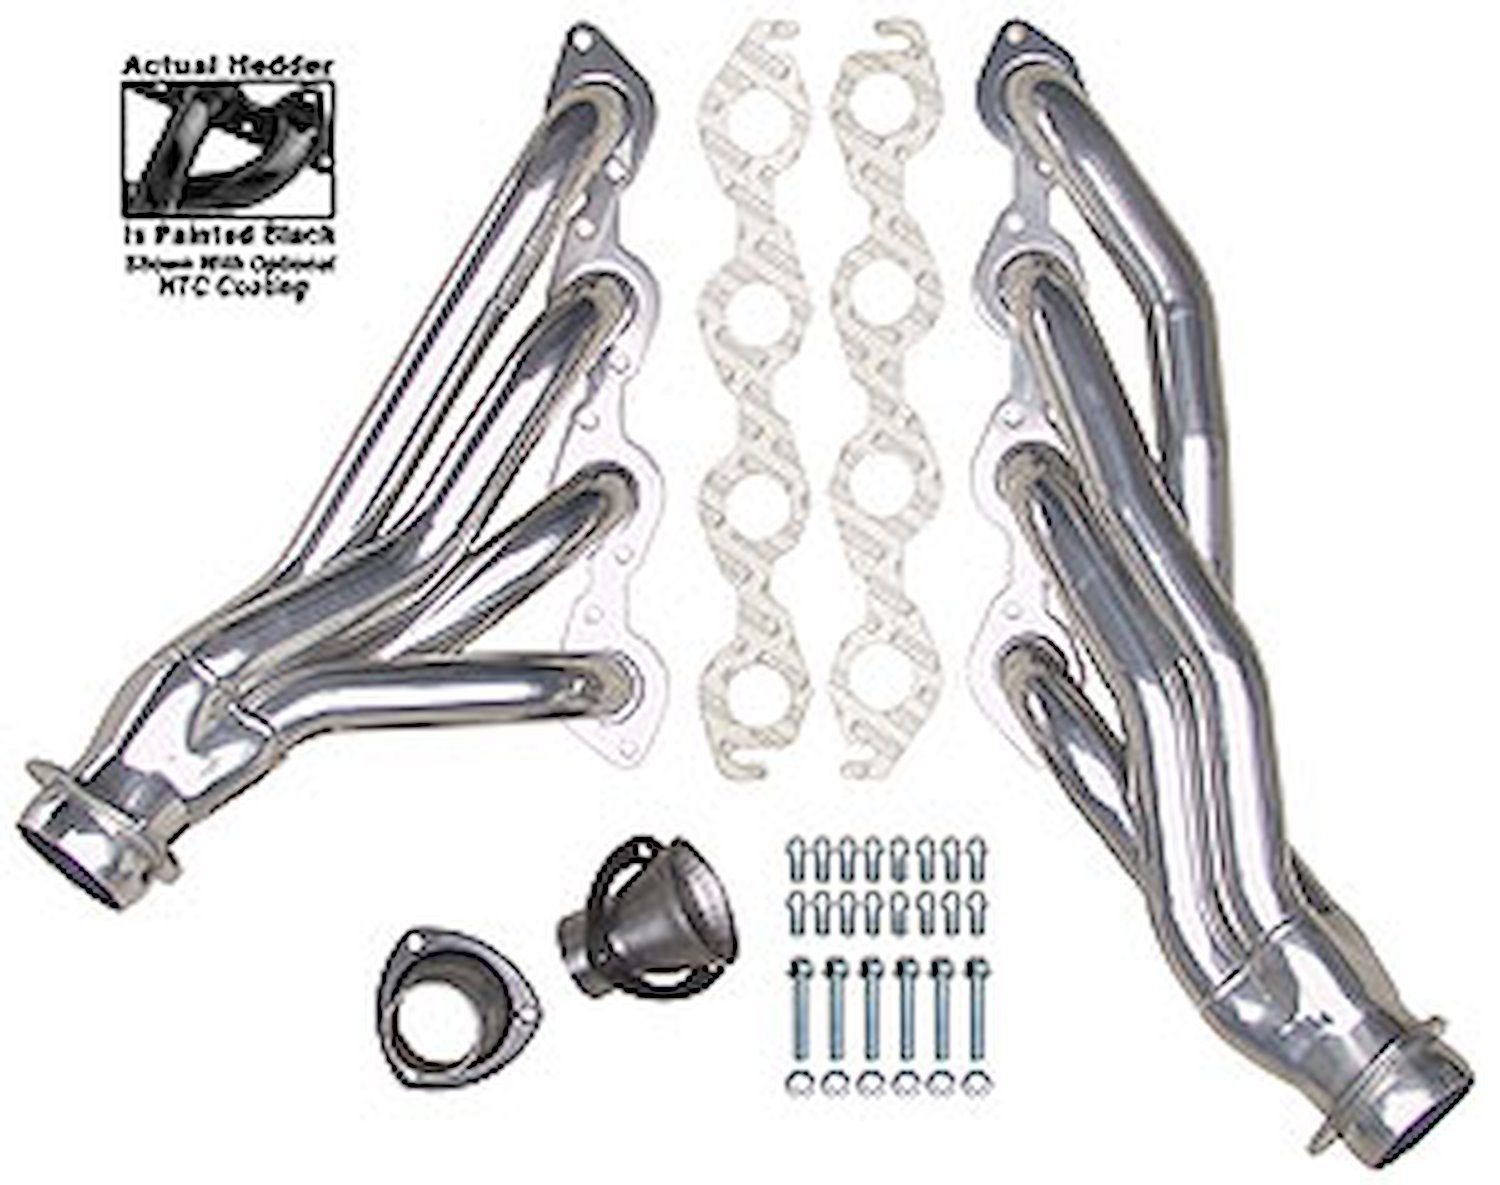 Standard Duty Uncoated Shorty Headers for 1965-77 Passenger Car 396-502